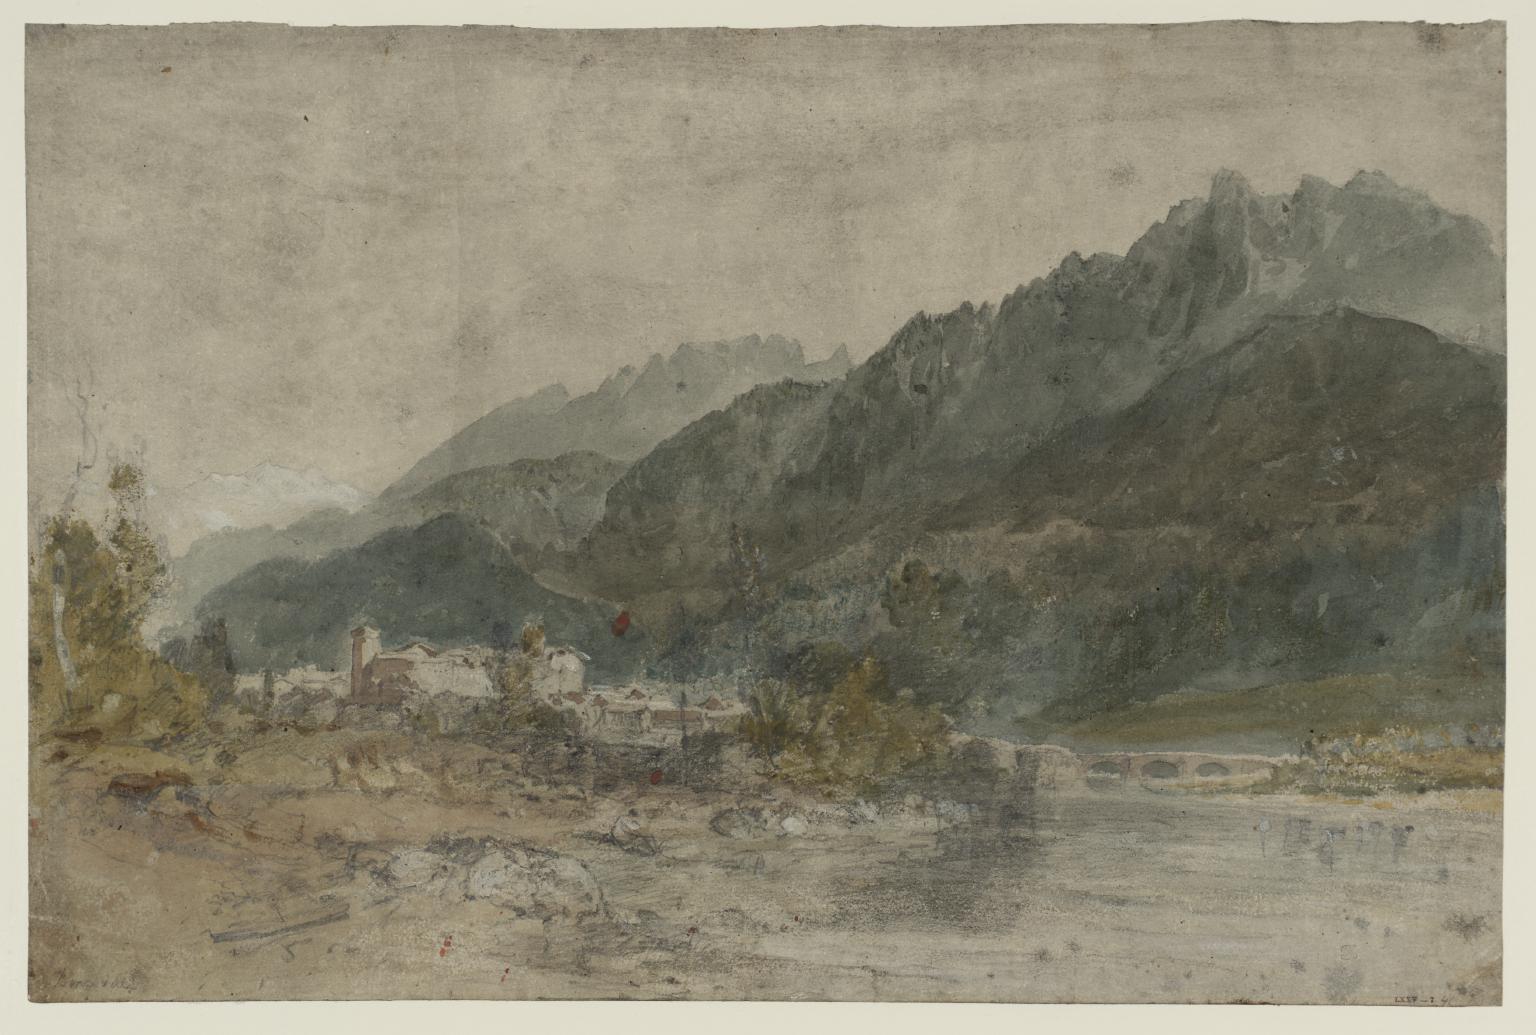 Bonneville and the River Arve from the Geneva Road, Looking East 1802 by Joseph Mallord William Turner 1775-1851